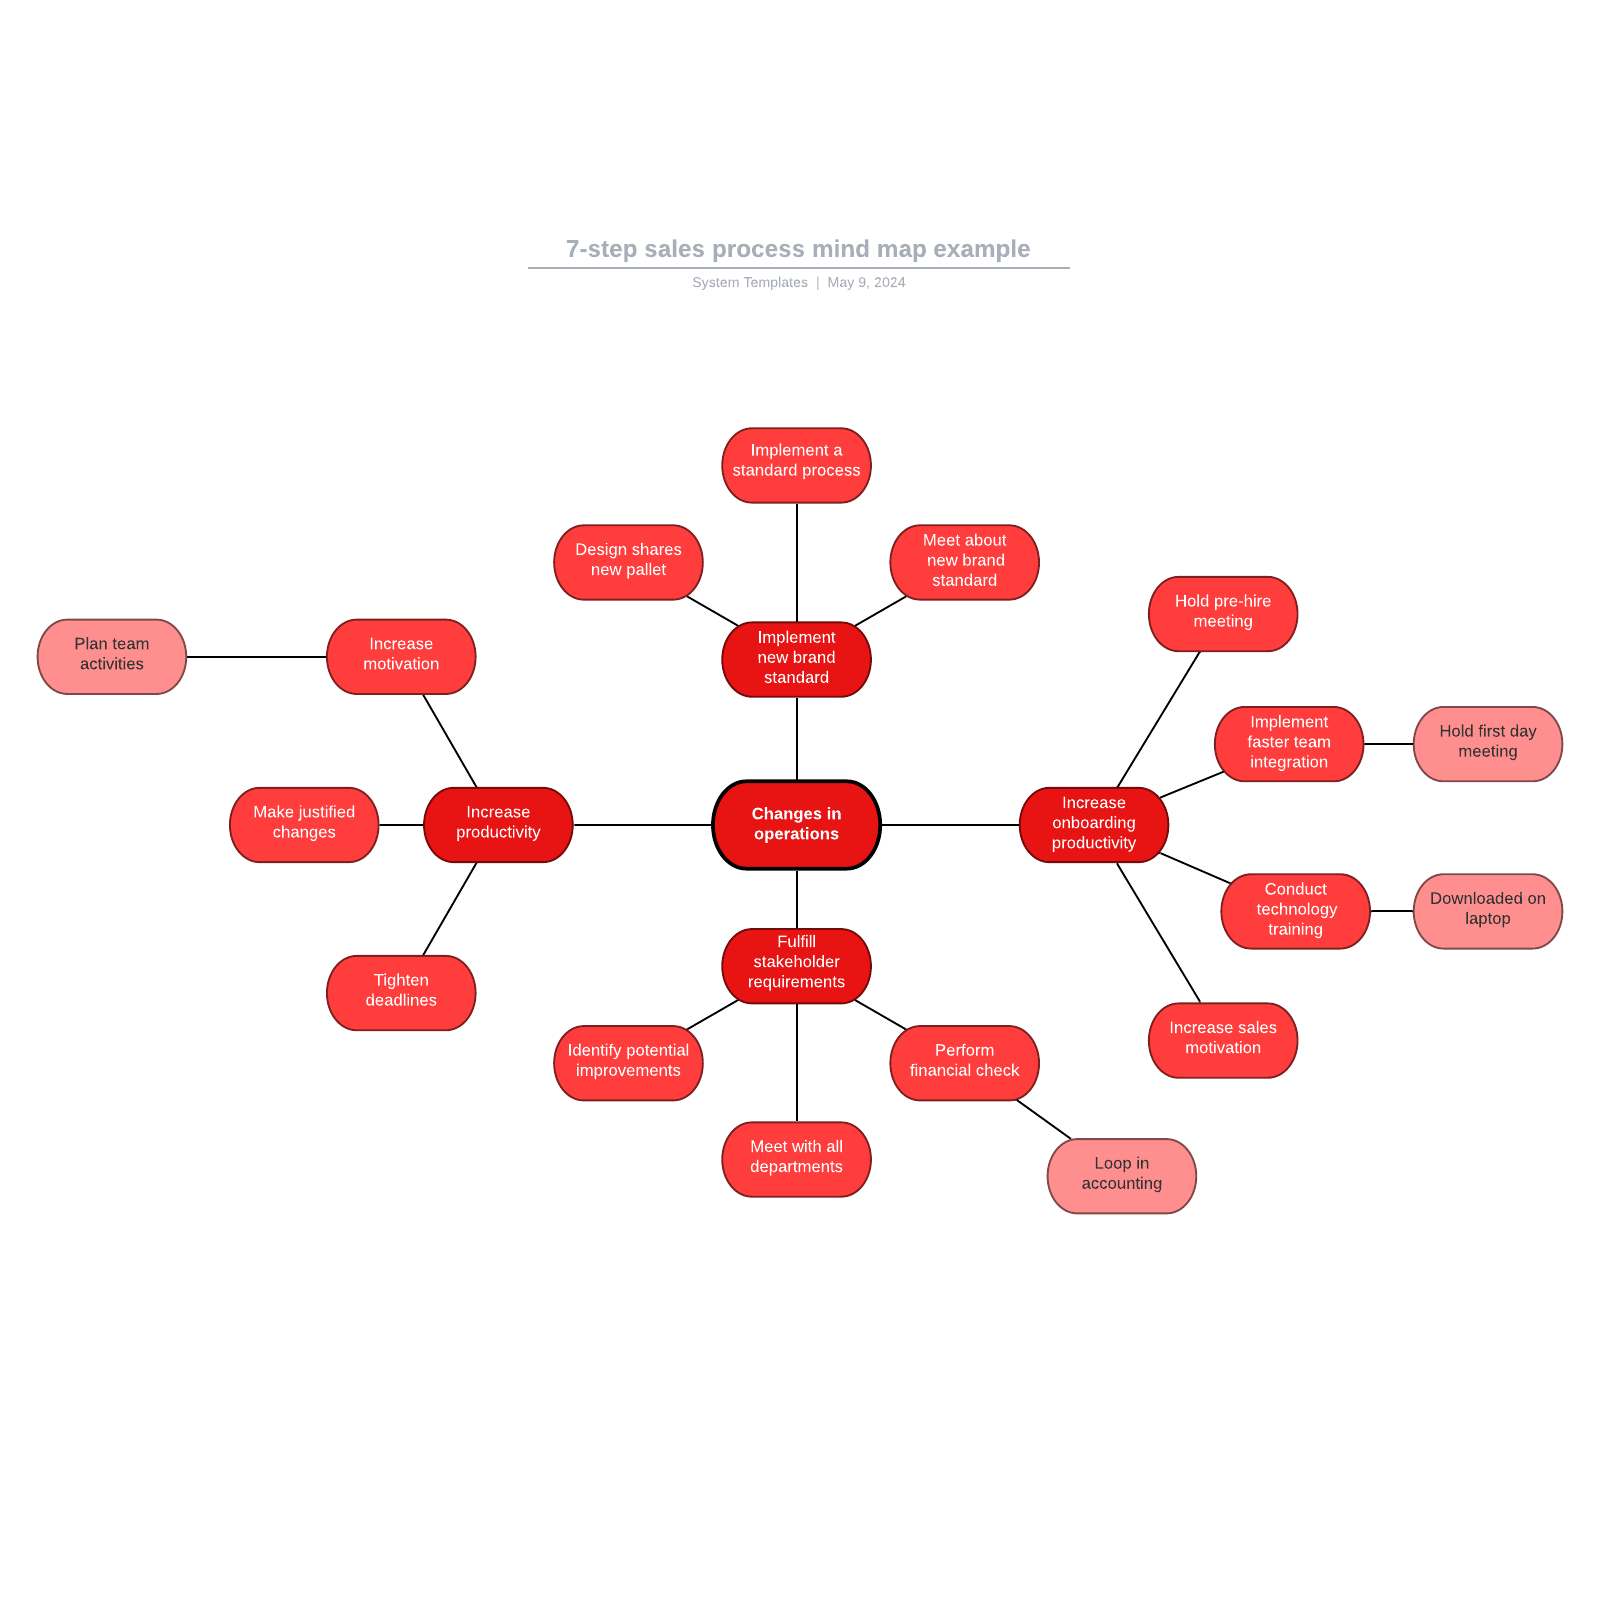 7-step sales process mind map example example